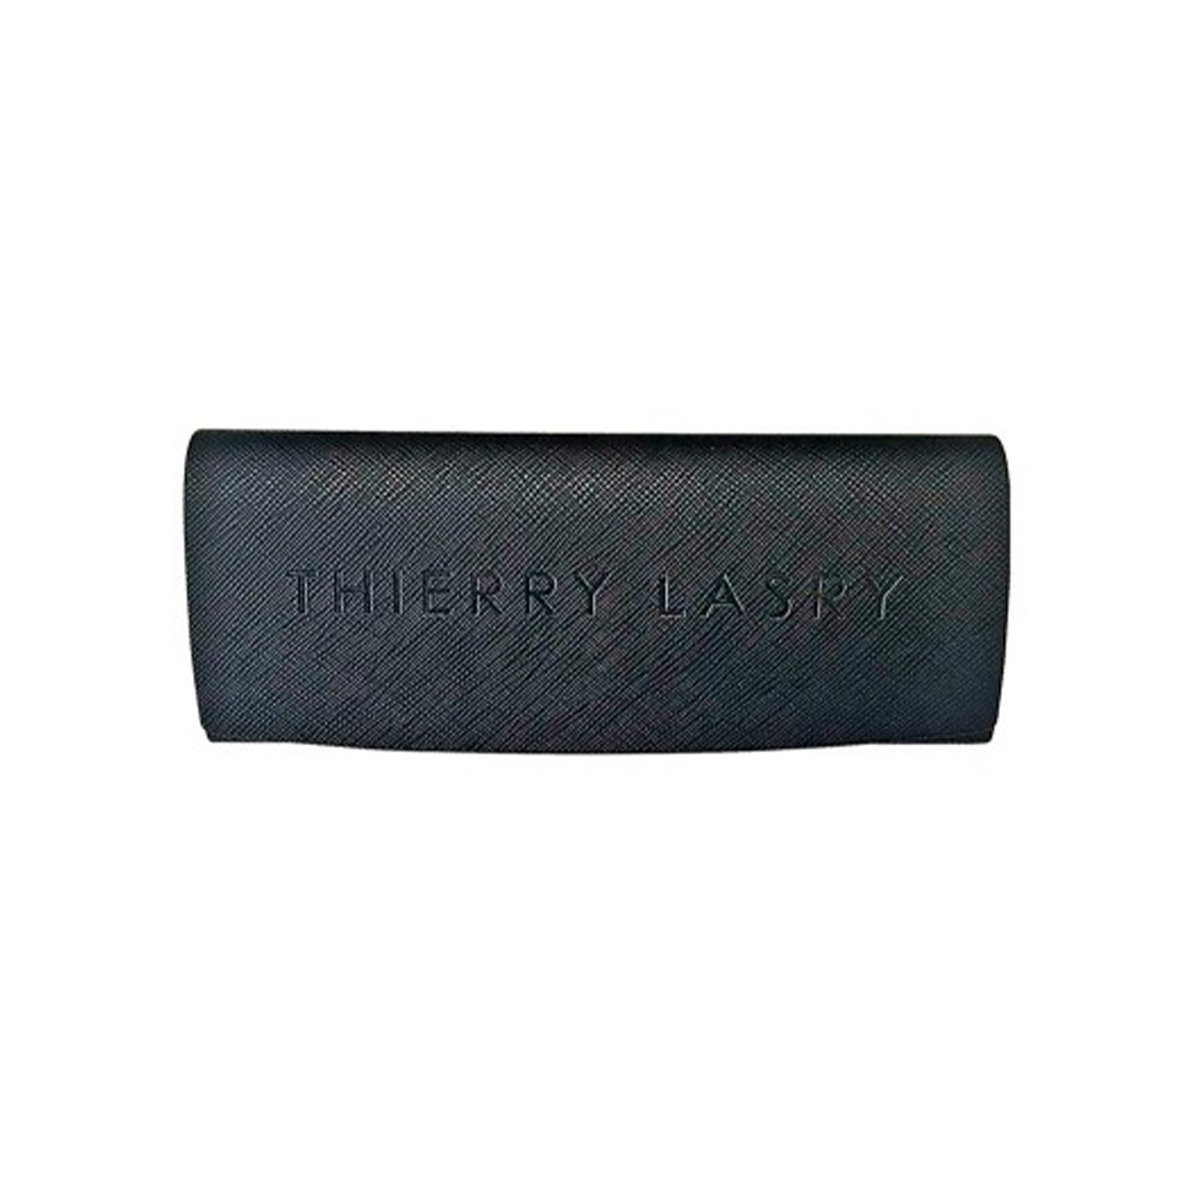 THIERRY LASRY HARD CASE | Thierry Lasry